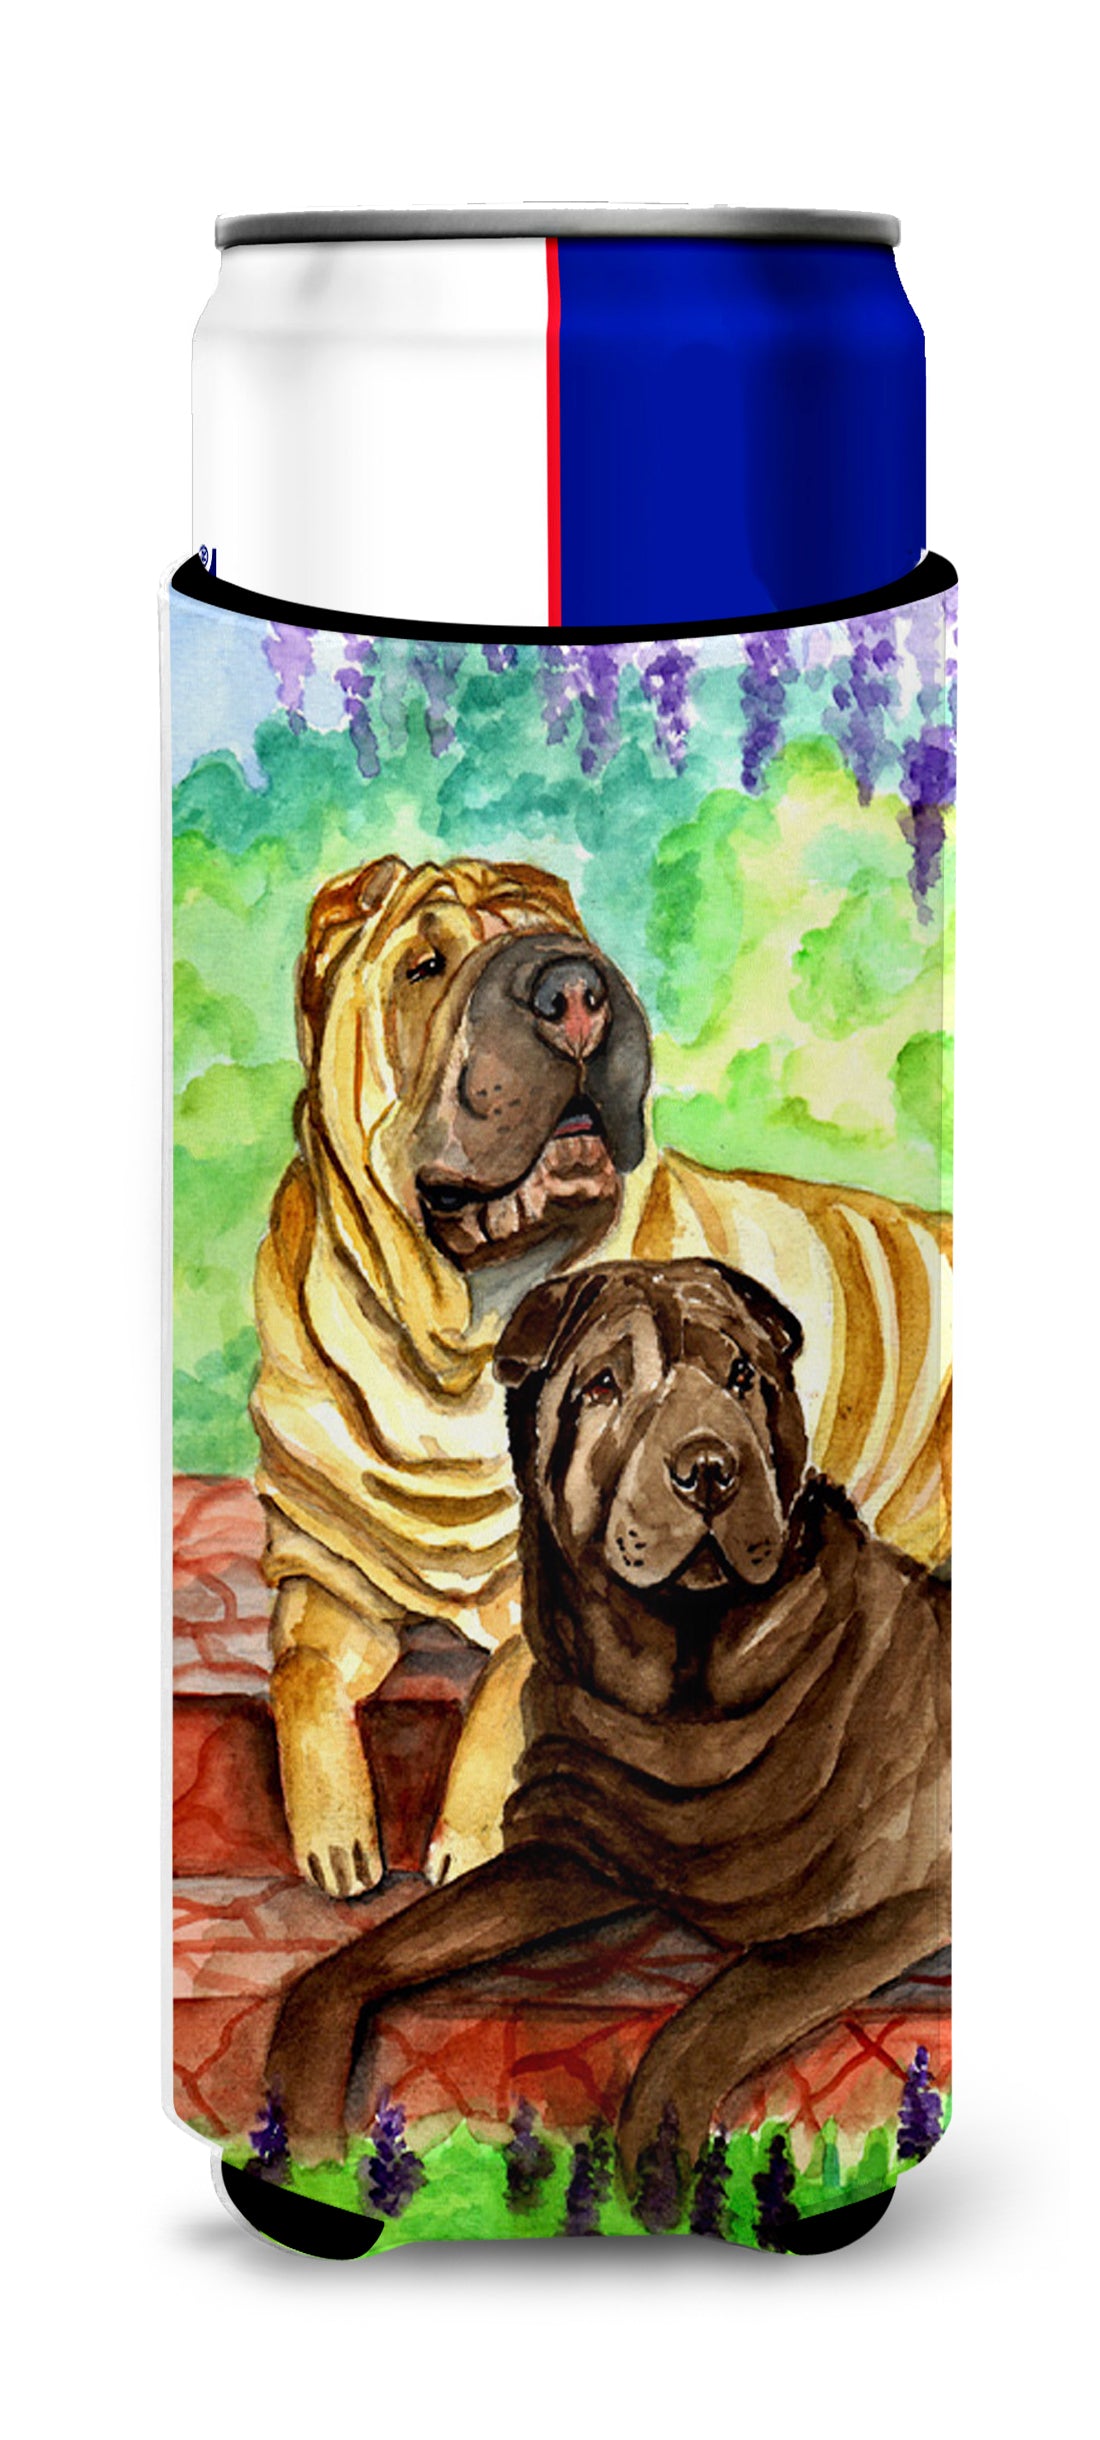 Shar Pei Fawn and Chocolate Ultra Beverage Insulators for slim cans 7070MUK